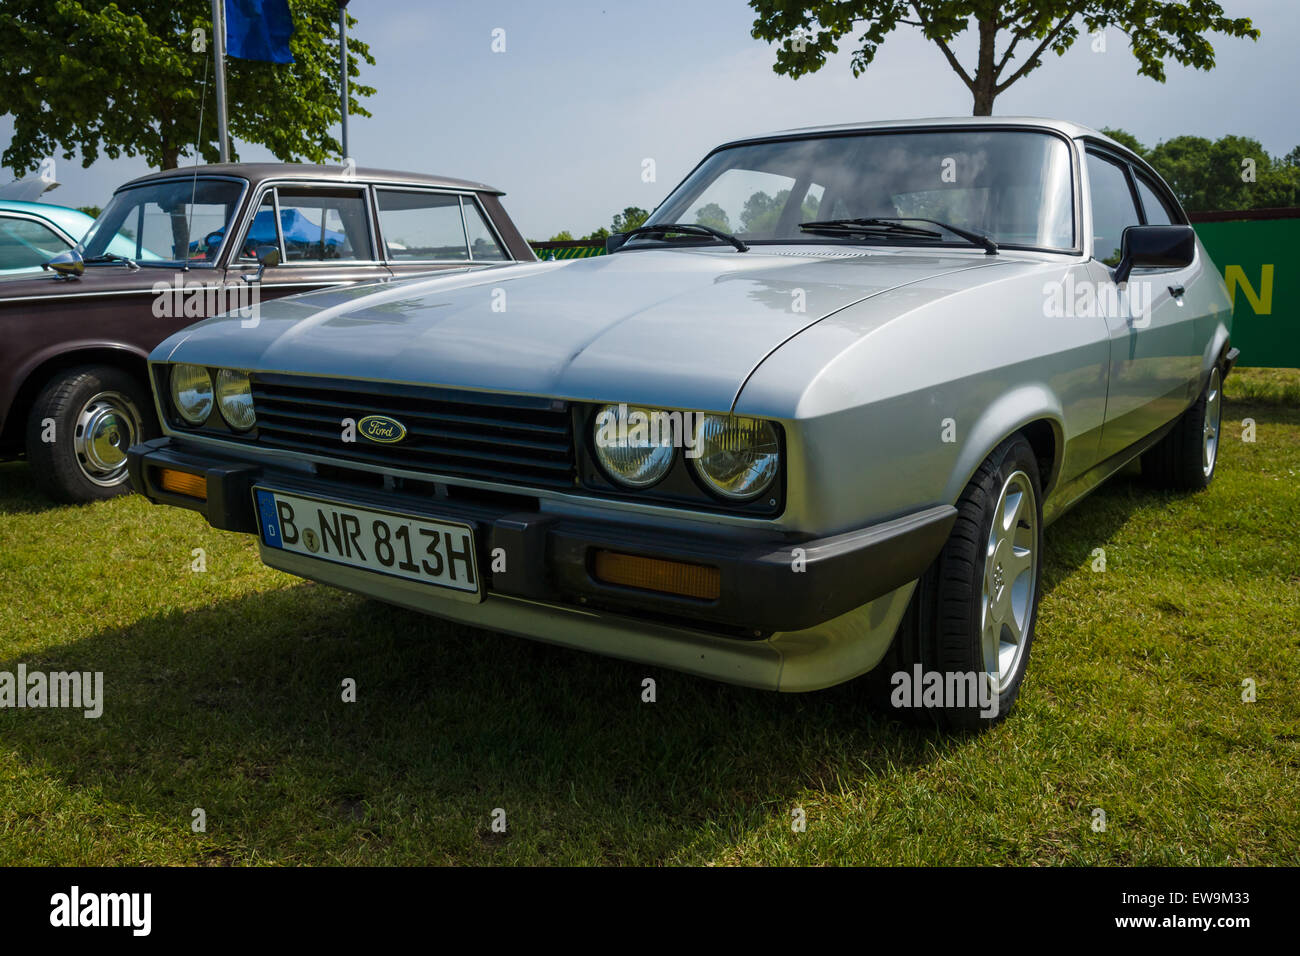 PAAREN IM GLIEN, GERMANY - MAY 23, 2015: Mid-size coupe Ford Capri. The oldtimer show in MAFZ. Stock Photo